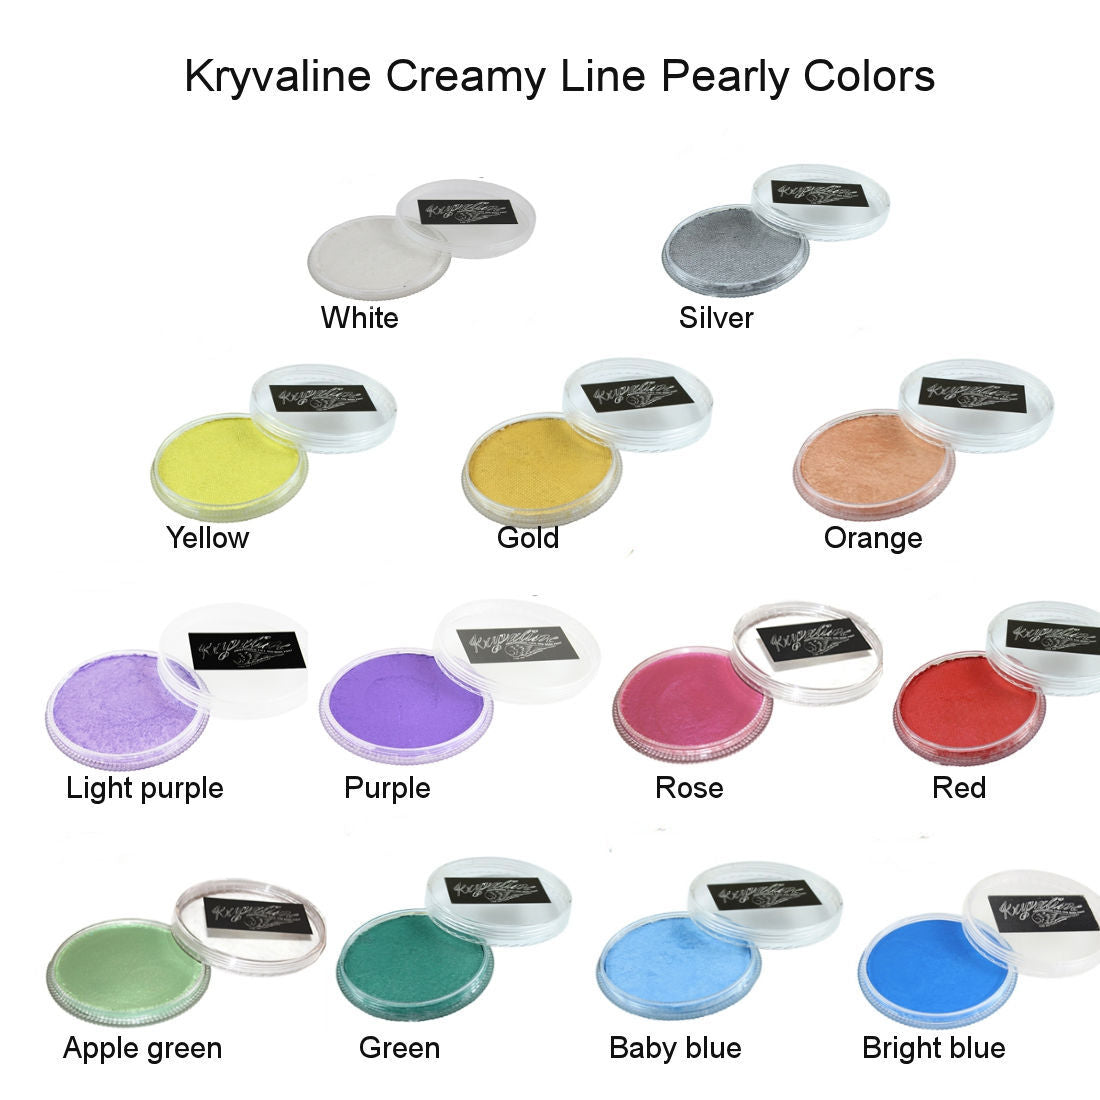 Kryvaline Face and body Paint Pearly Colors 30g Apple Green - Kryvaline Body Art Makeup | Glitter Tattoos, Face & Body Paint, Design - Kryvaline Body Art Makeup